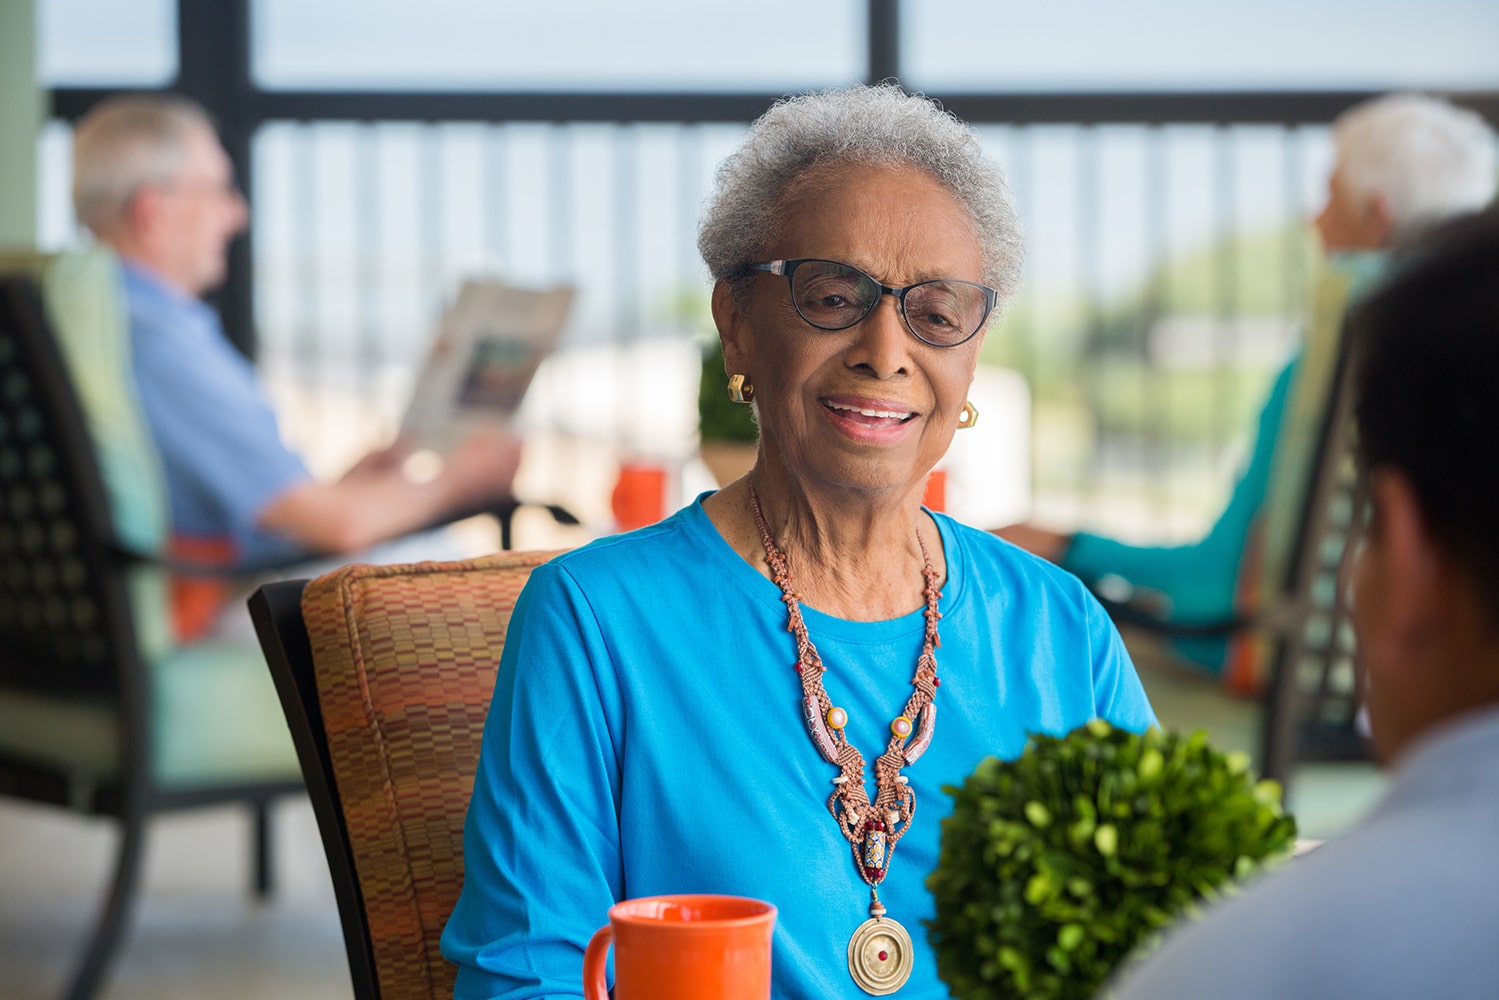 Elderly woman in a blue shirt and large statement necklace on the covered porch smiling at the person she's talking to with an elderly couple sitting in the background reading the newspaper